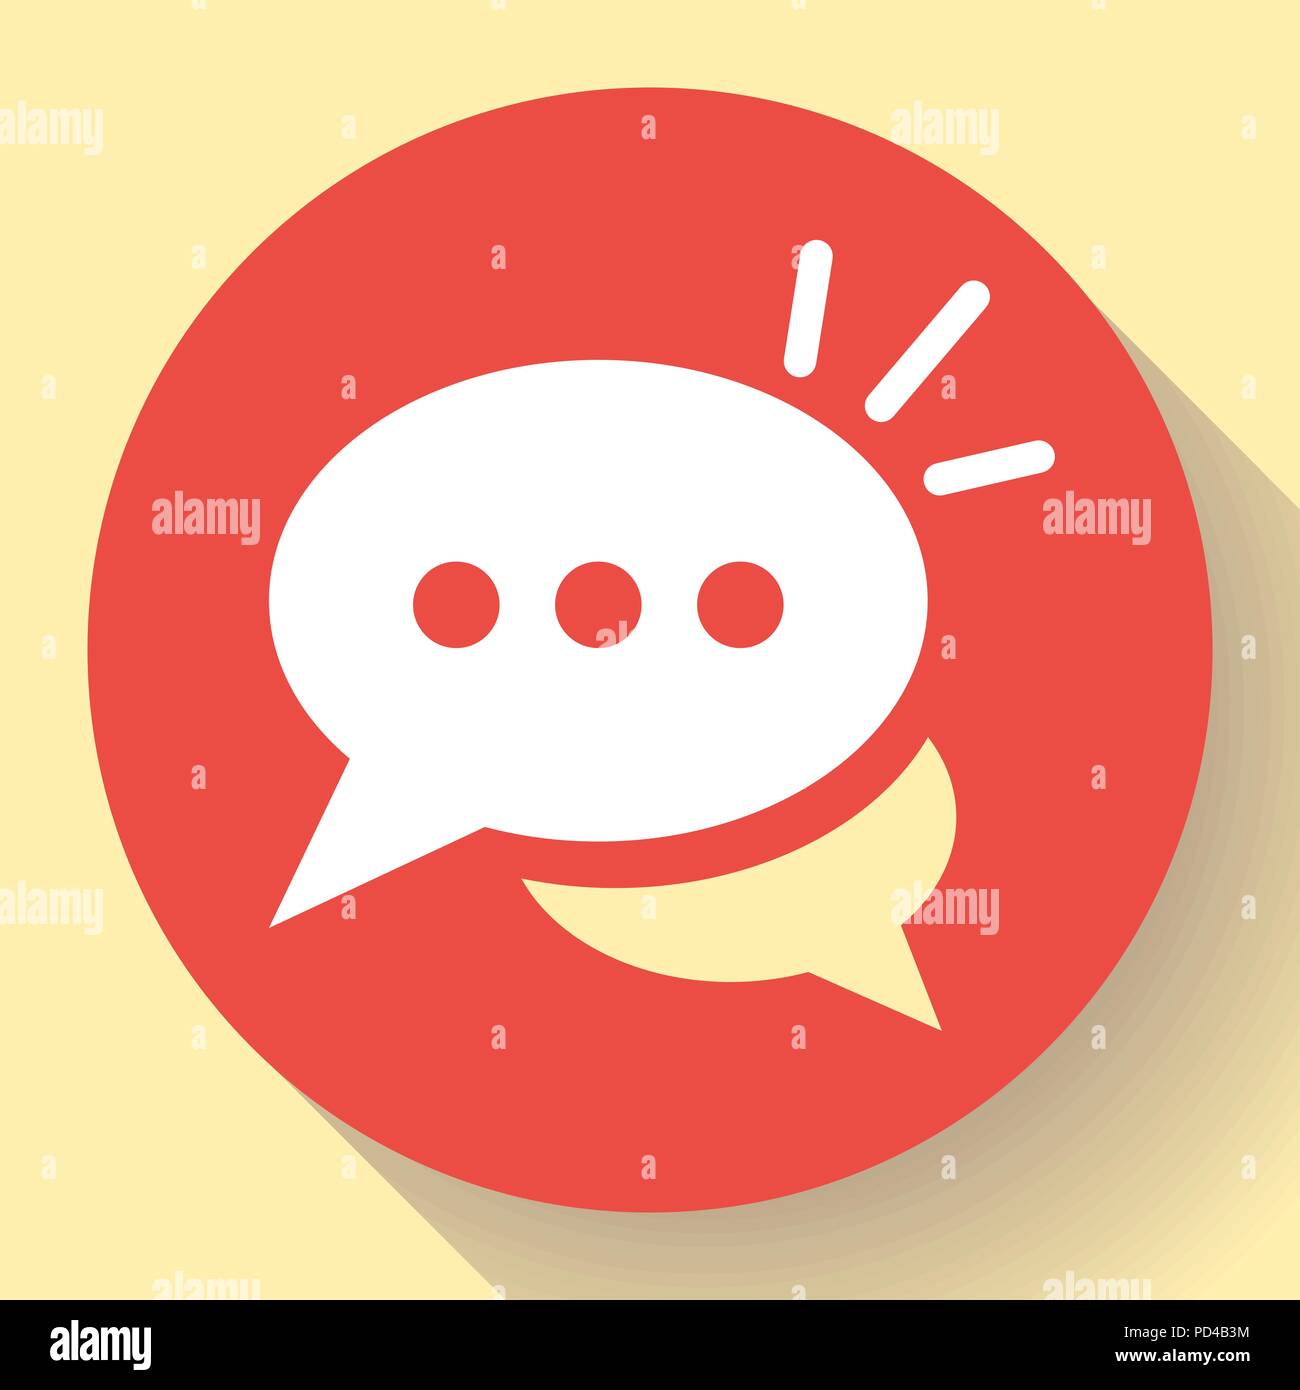 Live chat icon with dialog clouds vector. Speech bubble symbol for your web site design, logo, app, UI. Stock Vector